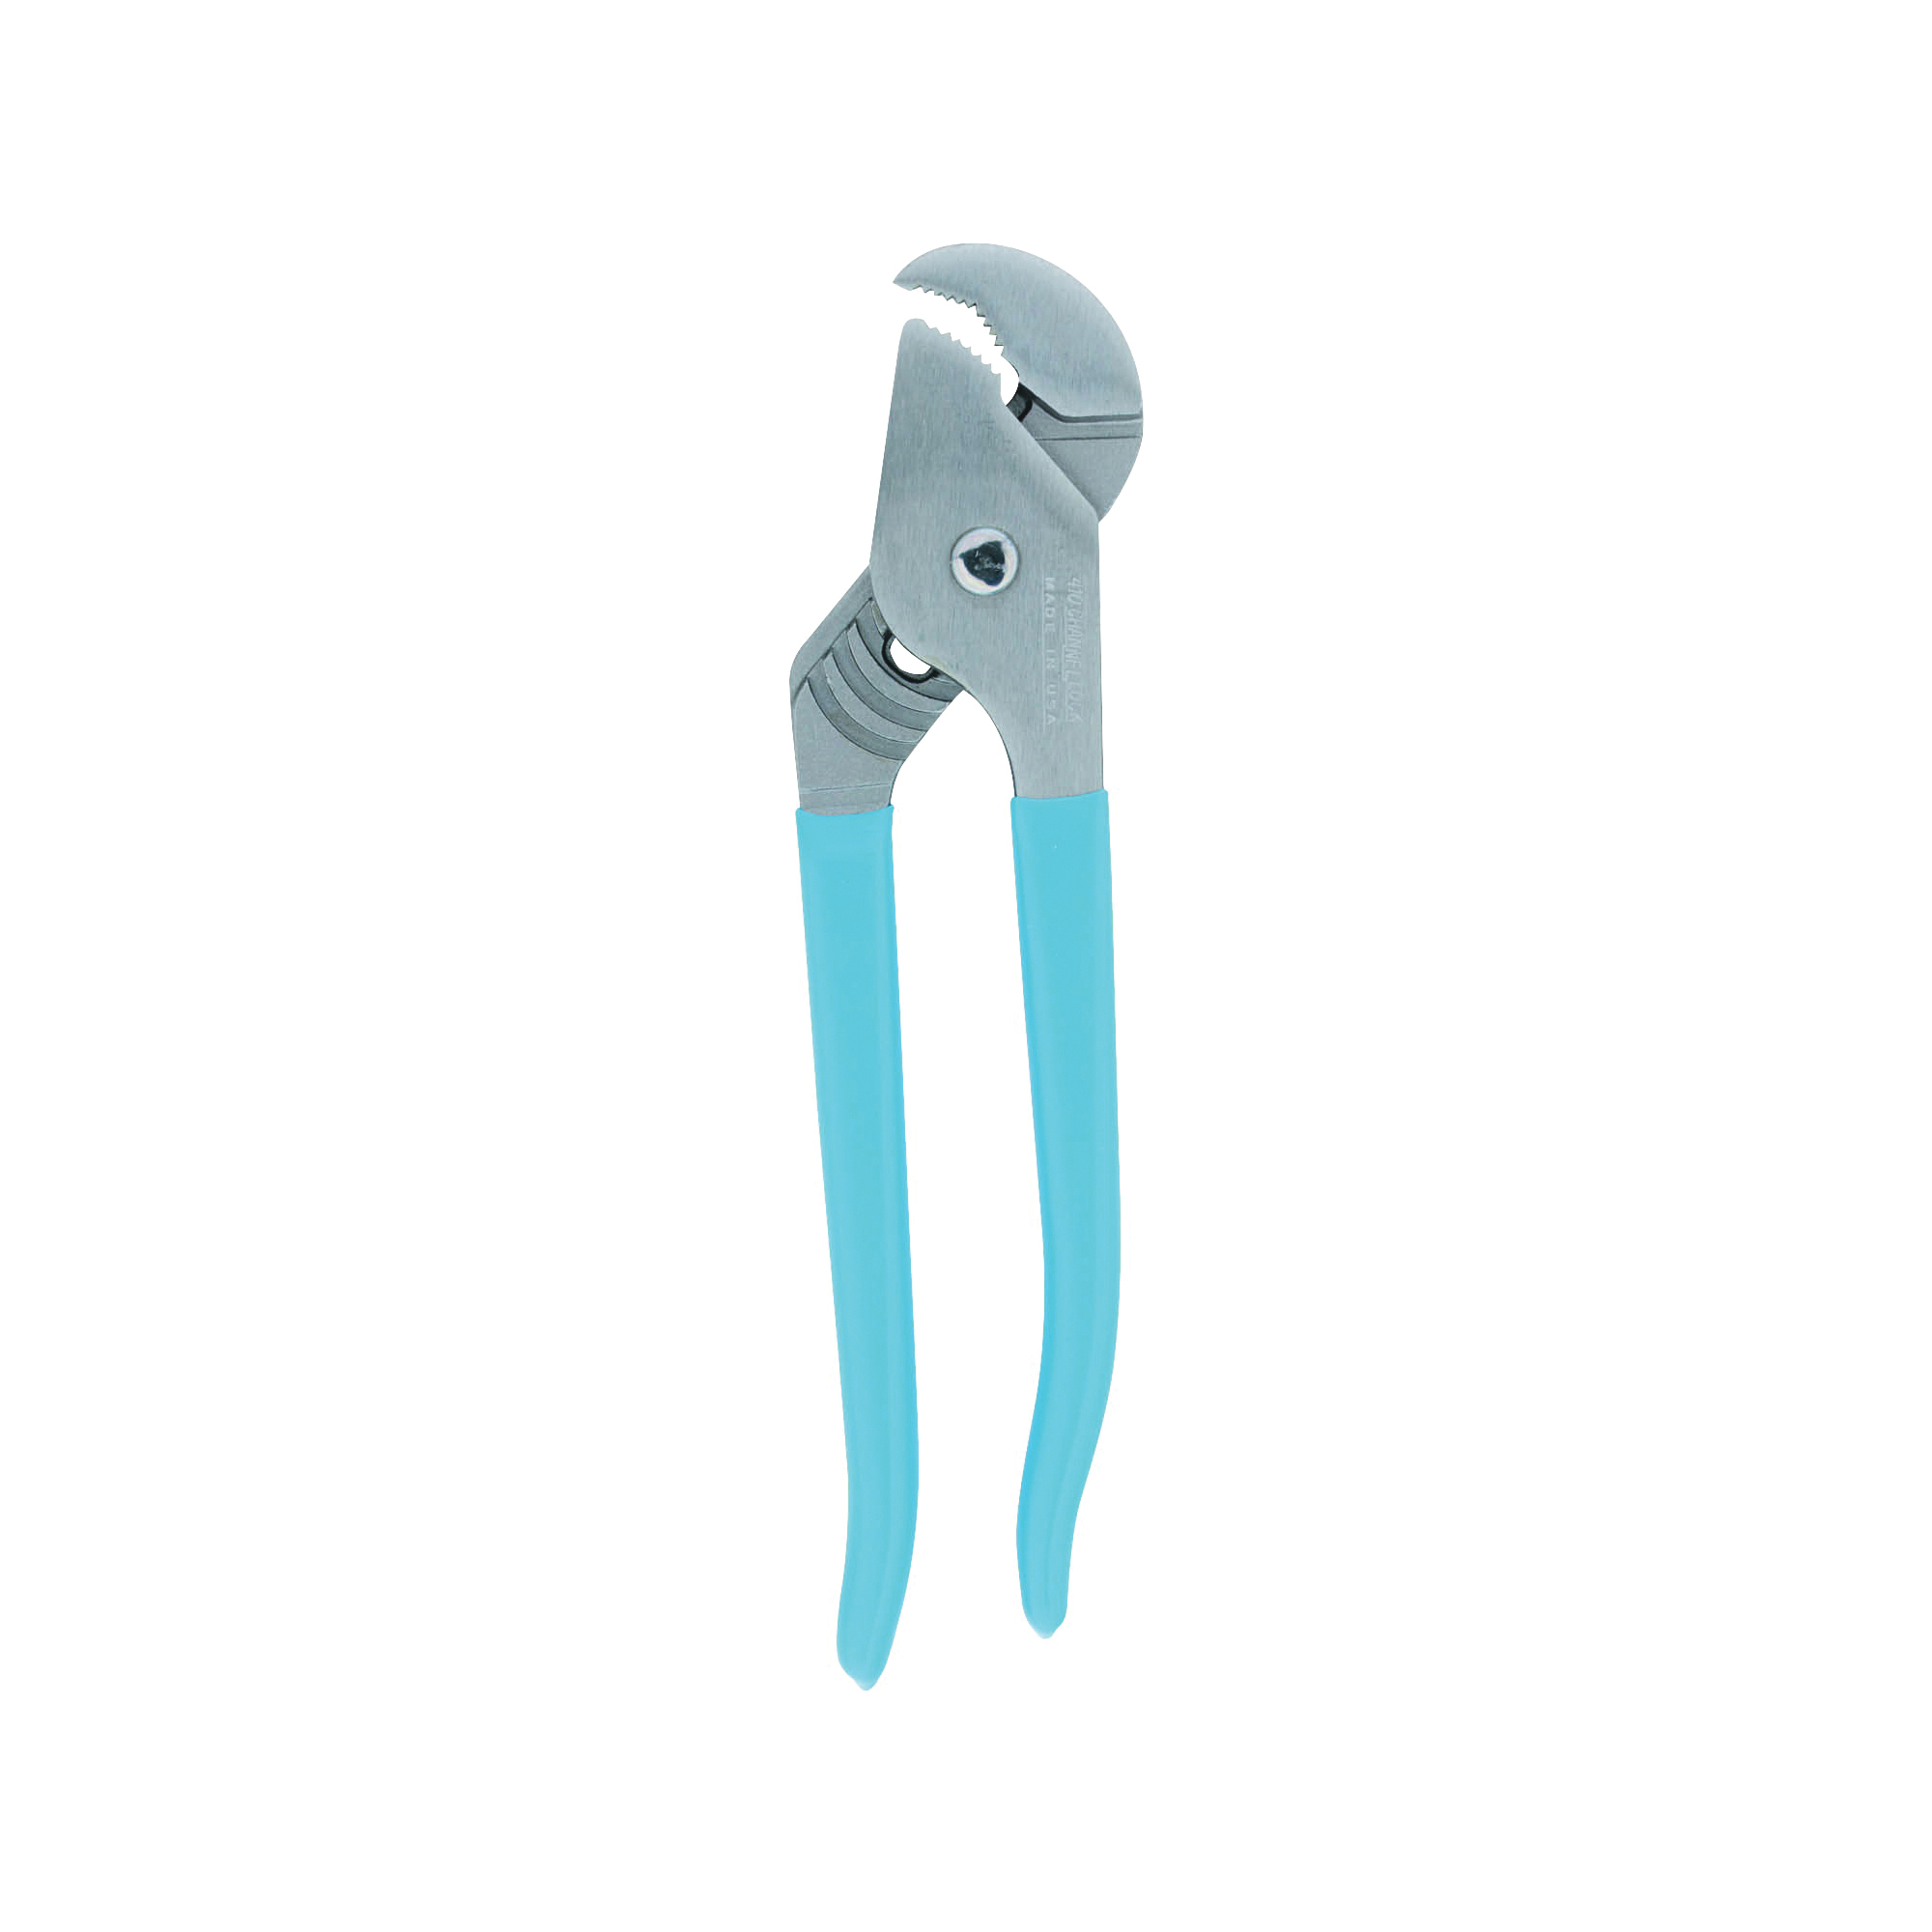 CHANNELLOCK 410 Tongue and Groove Plier, 9-1/2 in OAL, 1.12 in Jaw Opening, Blue Handle, Cushion-Grip Handle - 1